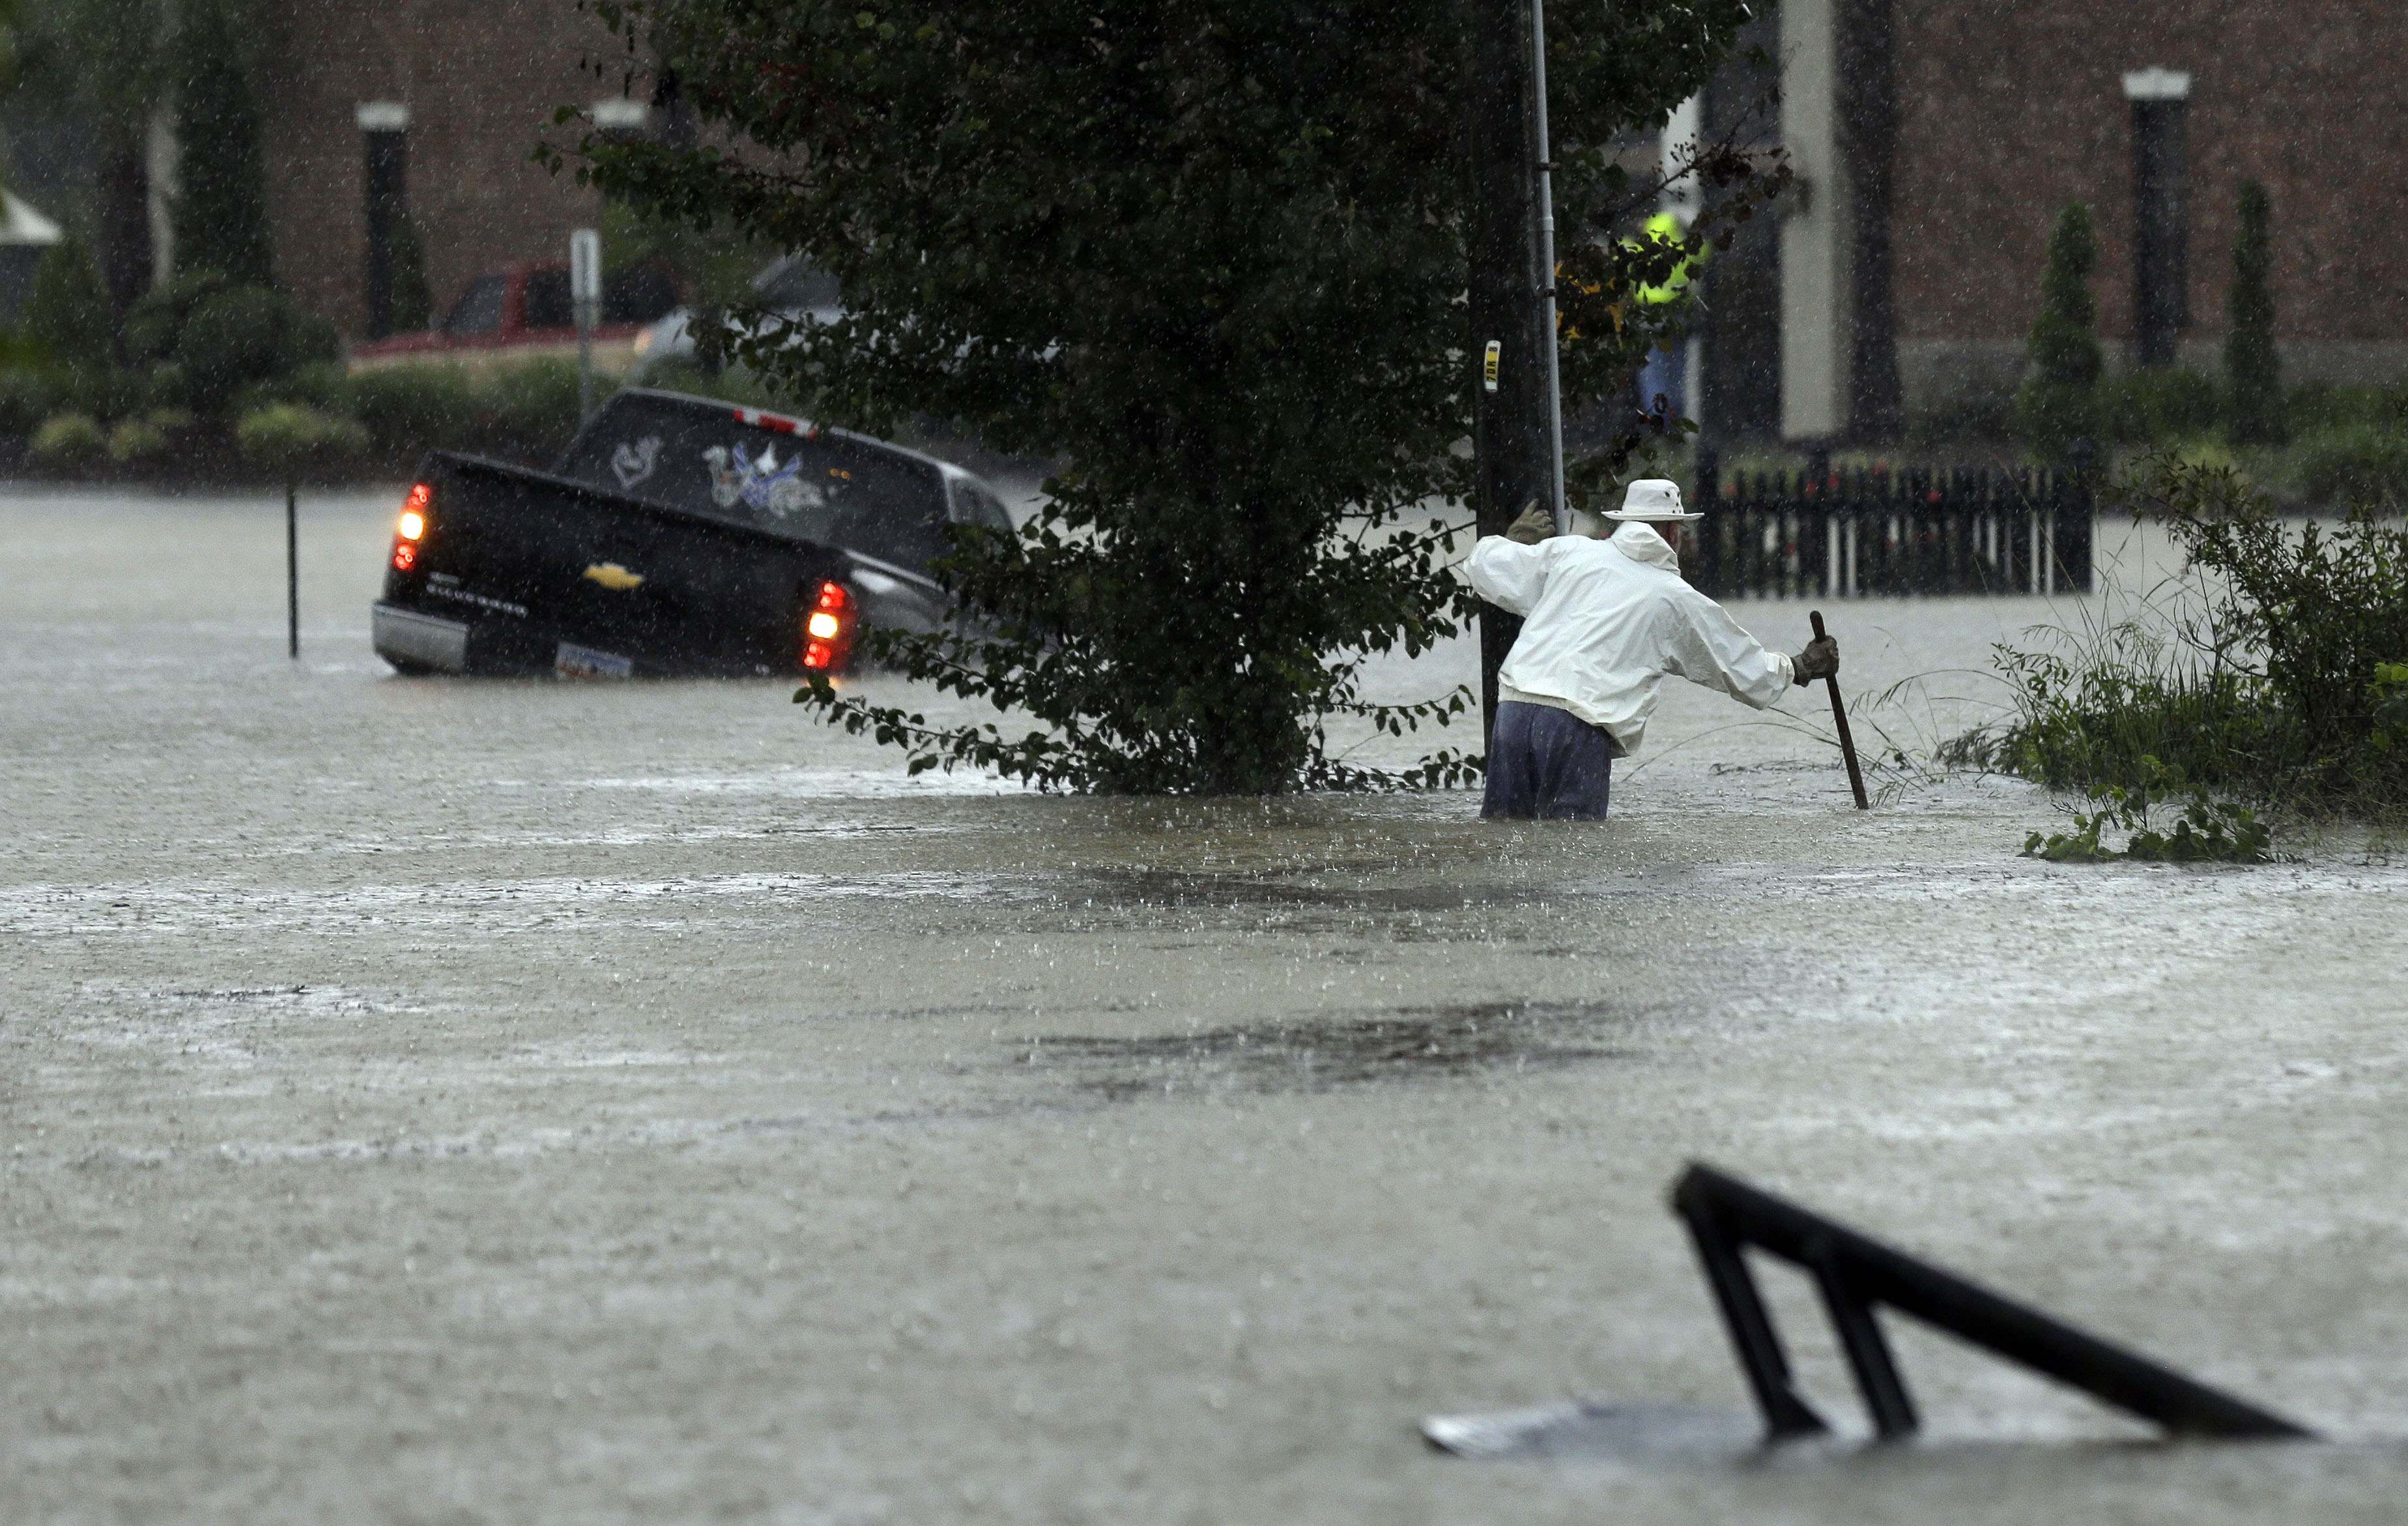 A vehicle and a man try to navigate floodwaters in Florence, S.C., Sunday, Oct. 4, 2015, as heavy rain continues to cause widespread flooding